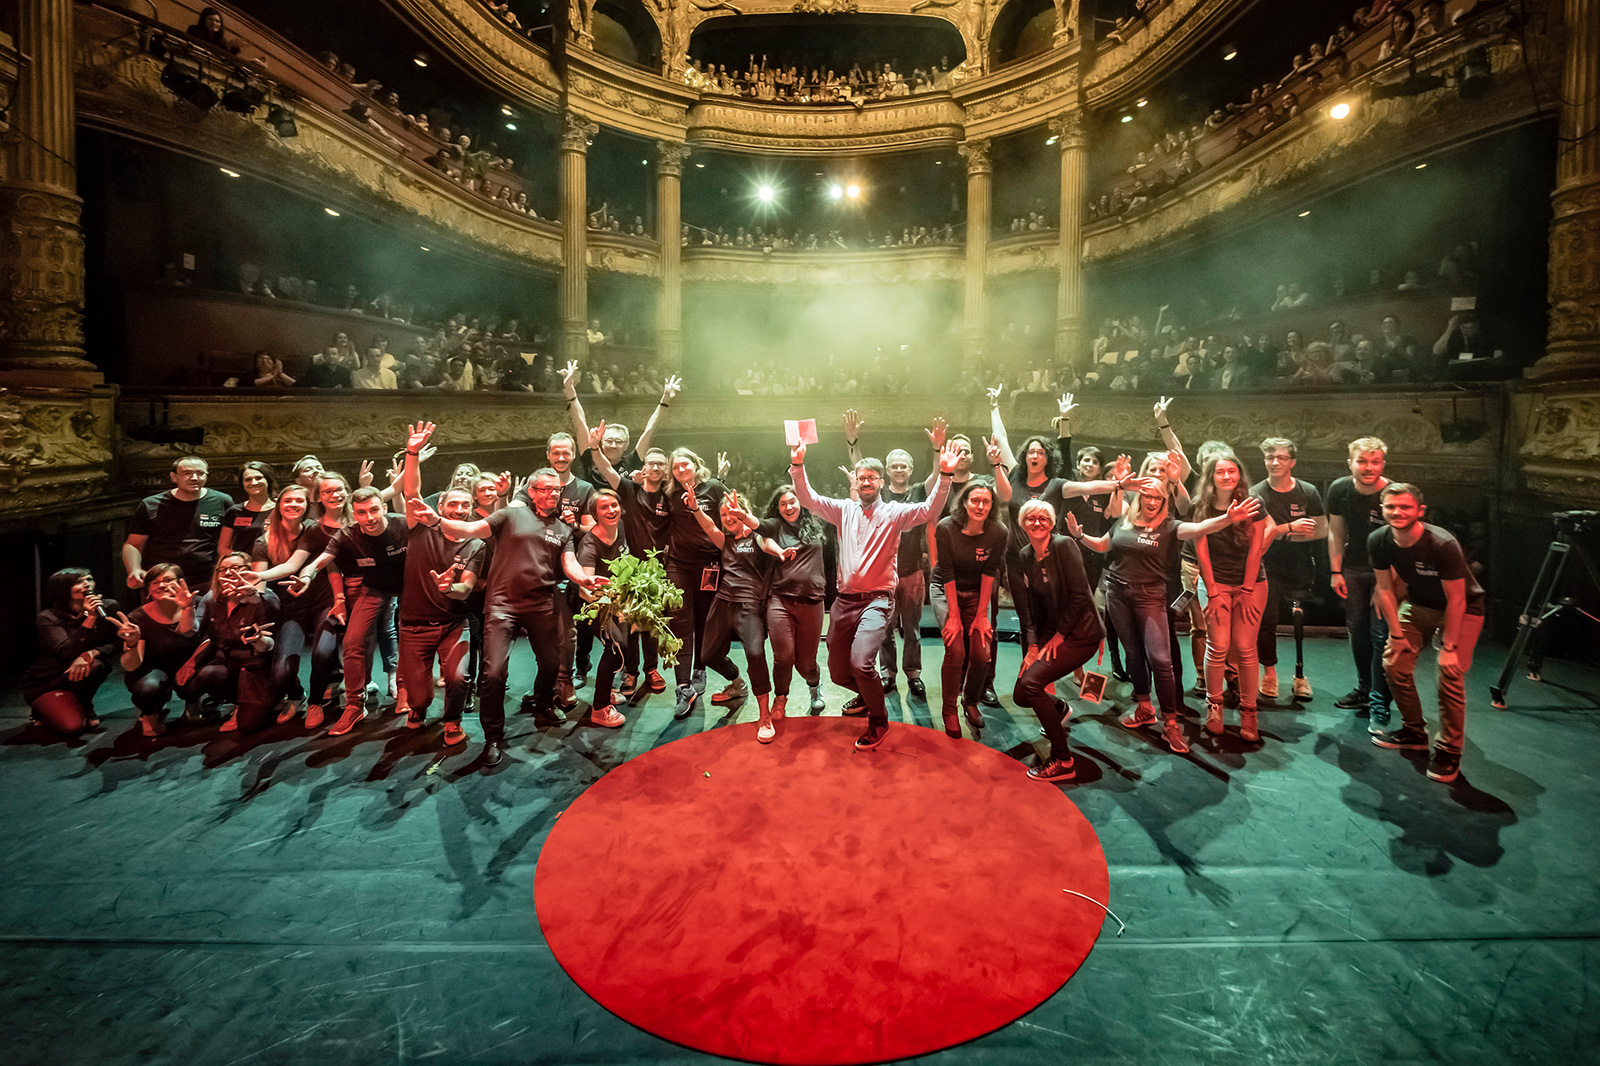 Tedx group photo in theater